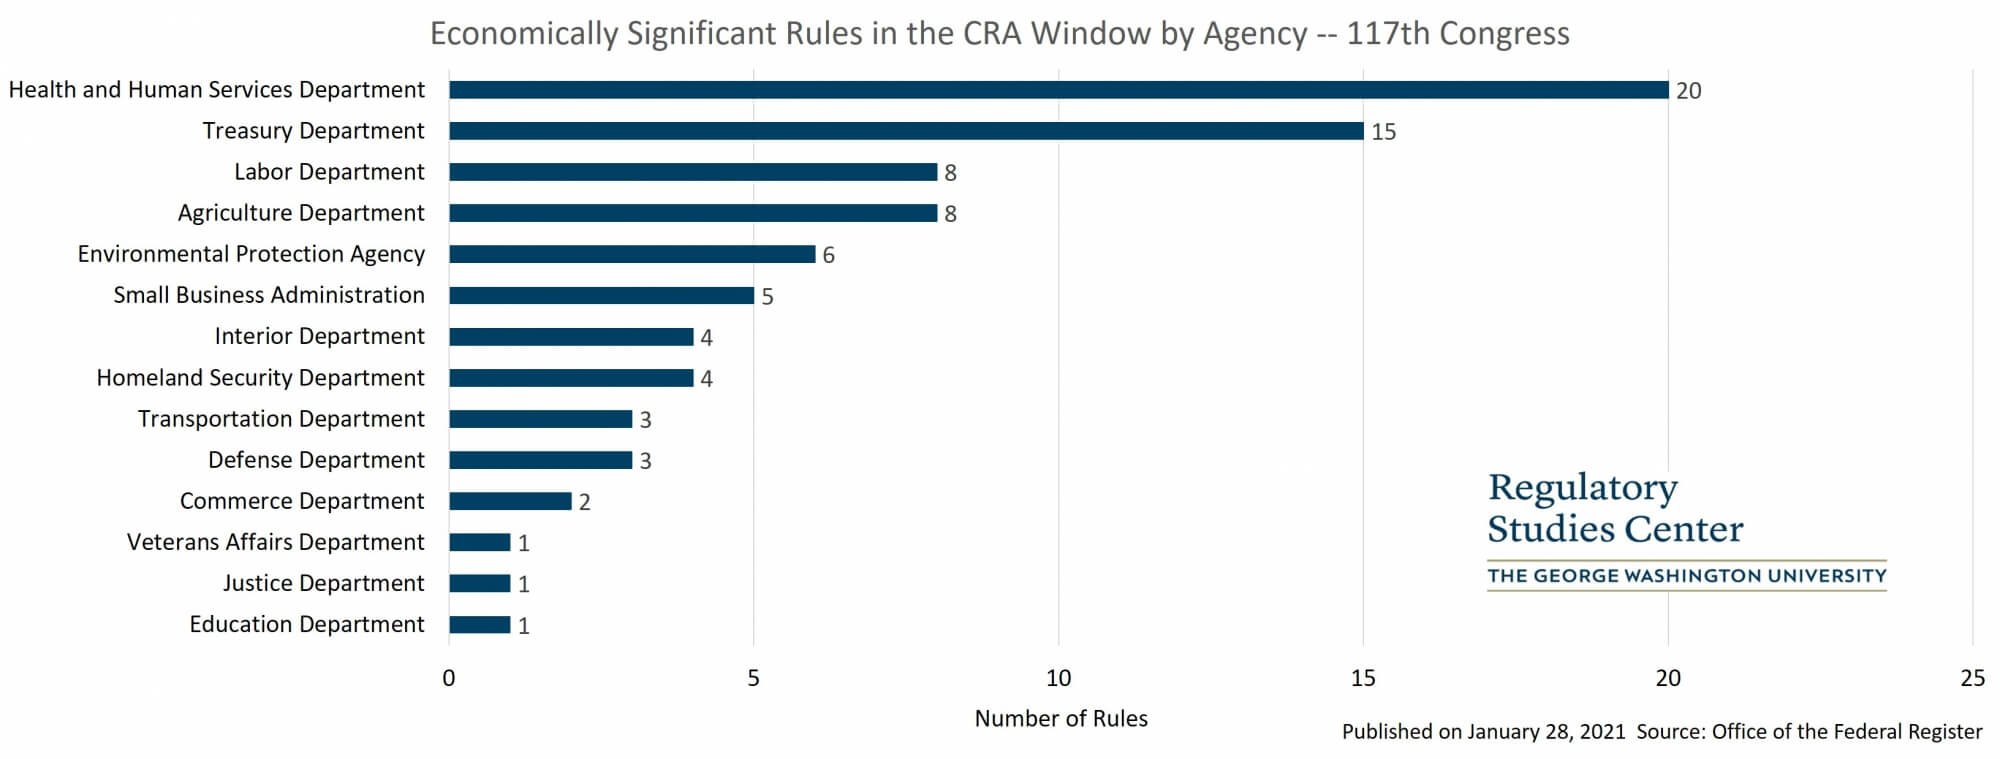 Bar chart depicting the number of economically significant rules in the CRA window published by agency.